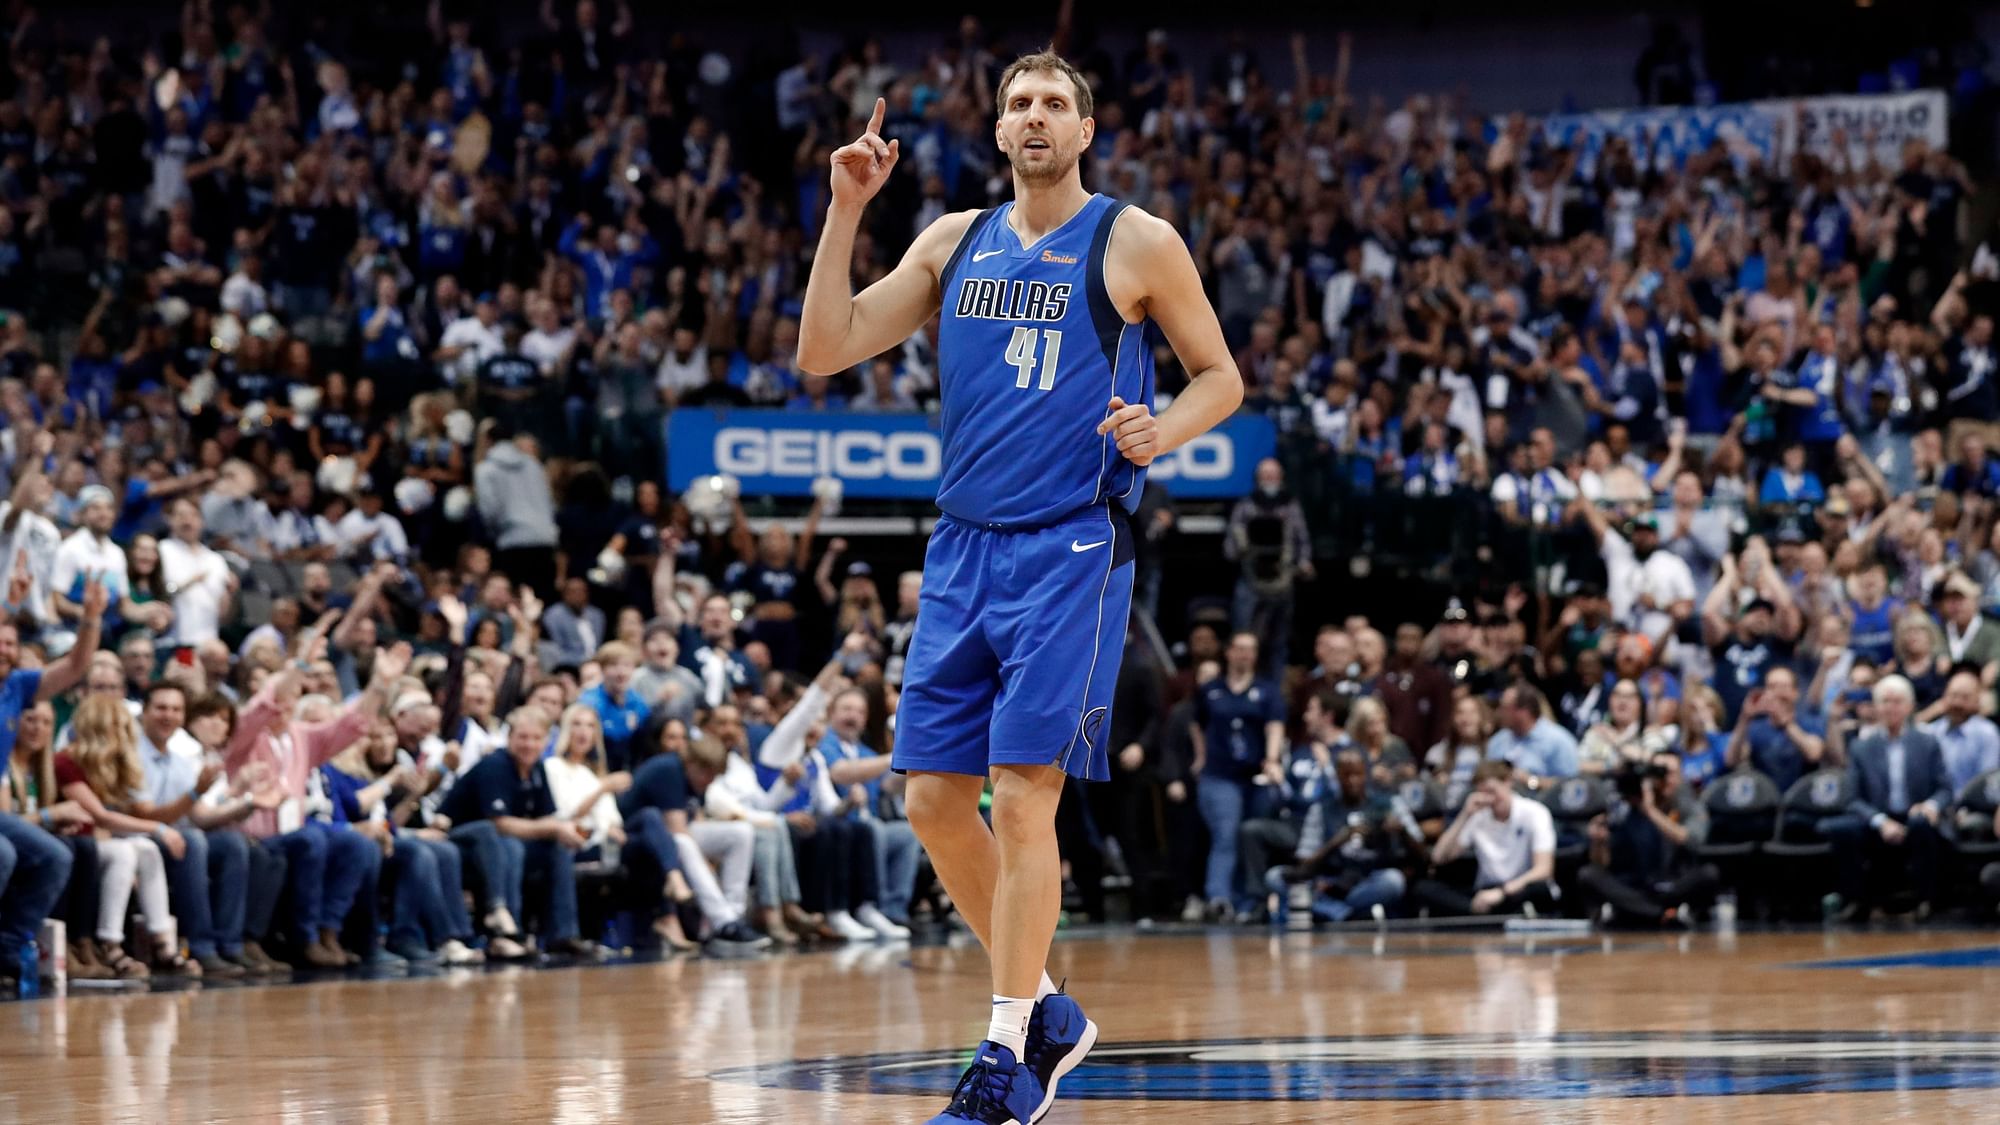 Dallas Mavericks’ Dirk Nowitzki (41) celebrates sinking a 3-point basket during the second half of the team’s NBA basketball game against the Phoenix Suns in Dallas.